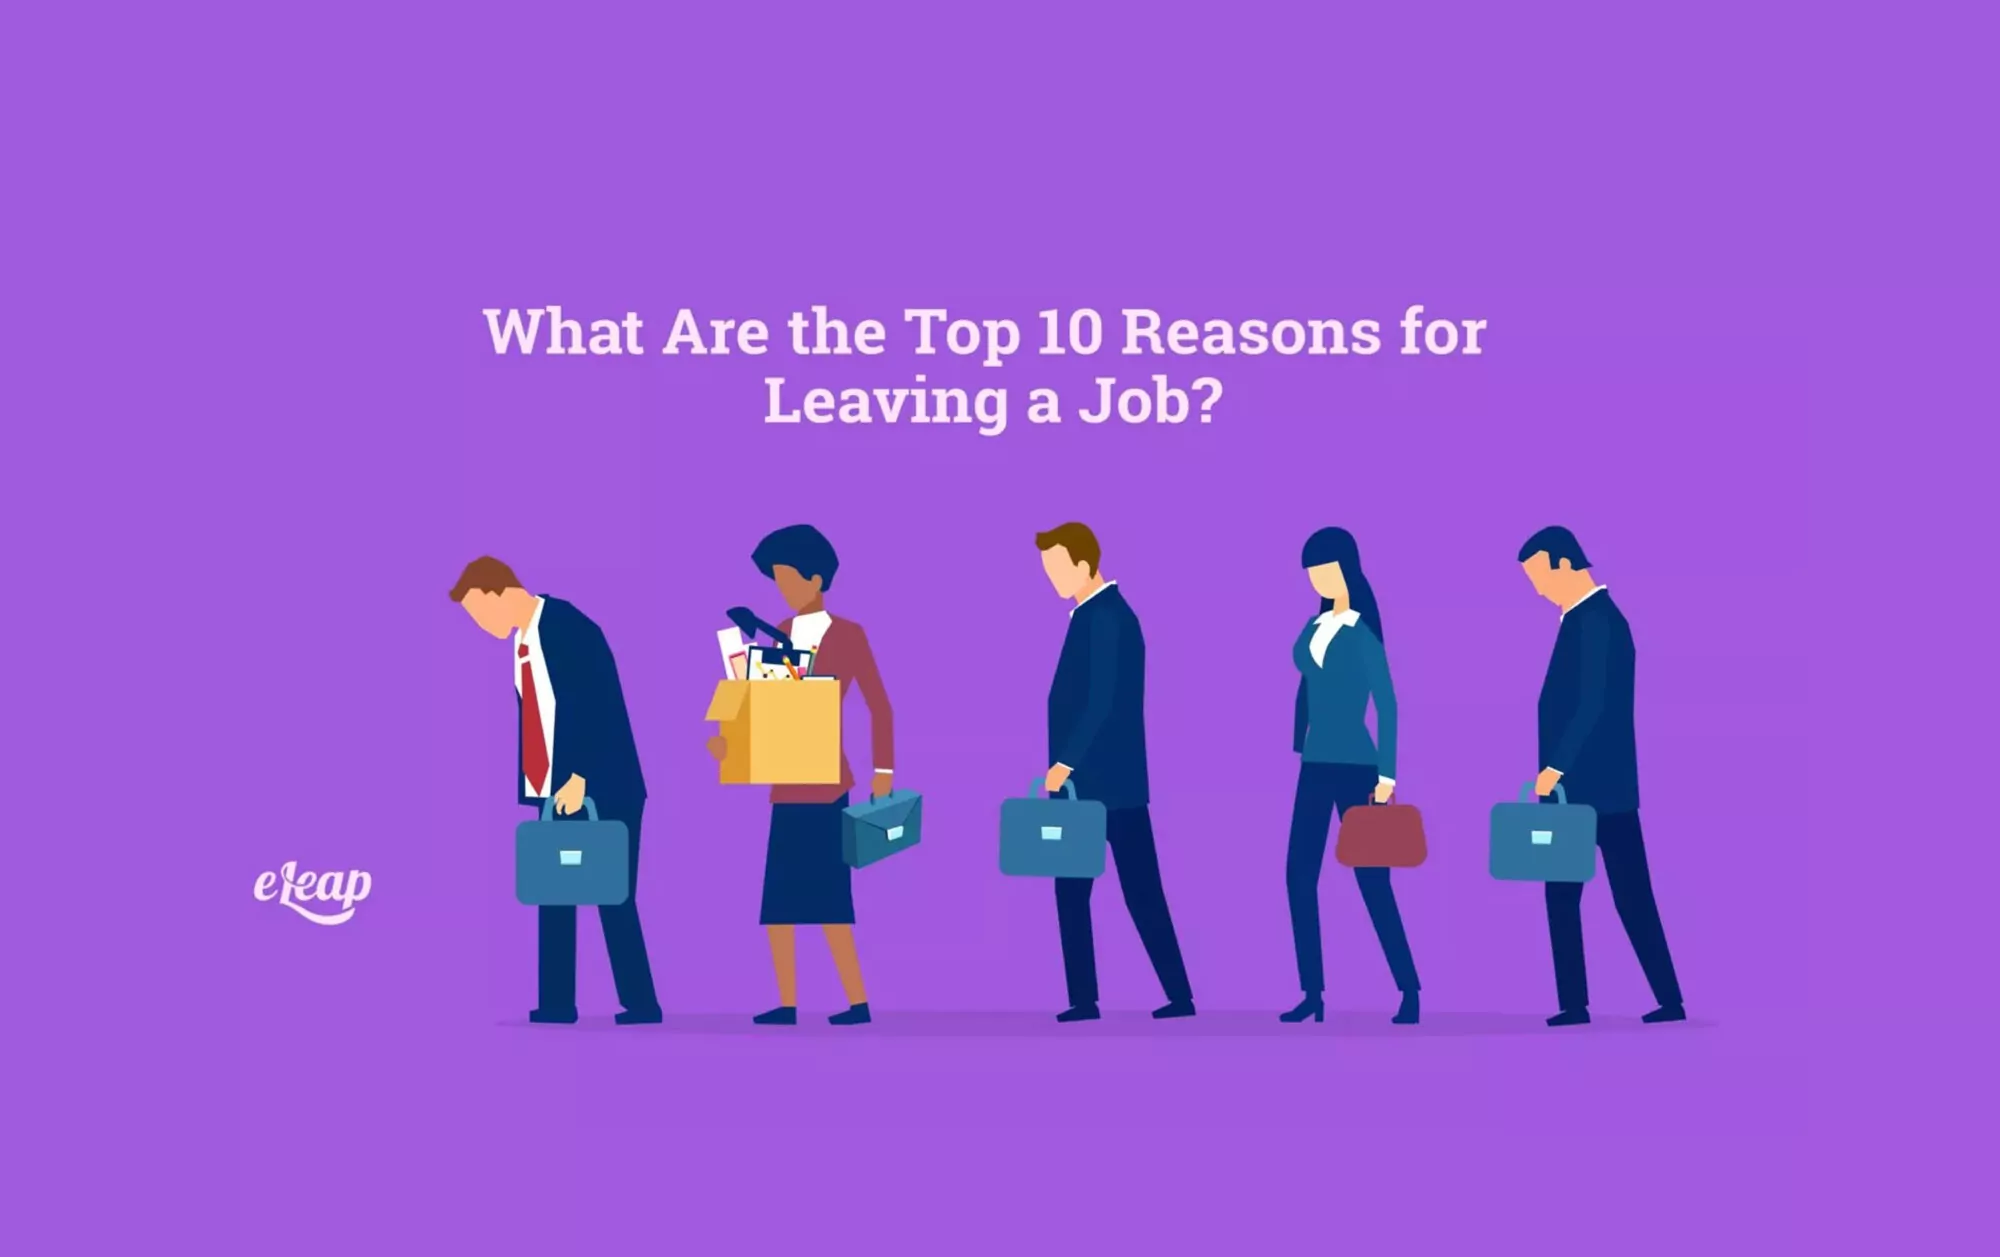 Top 10 Reasons for Leaving a Job